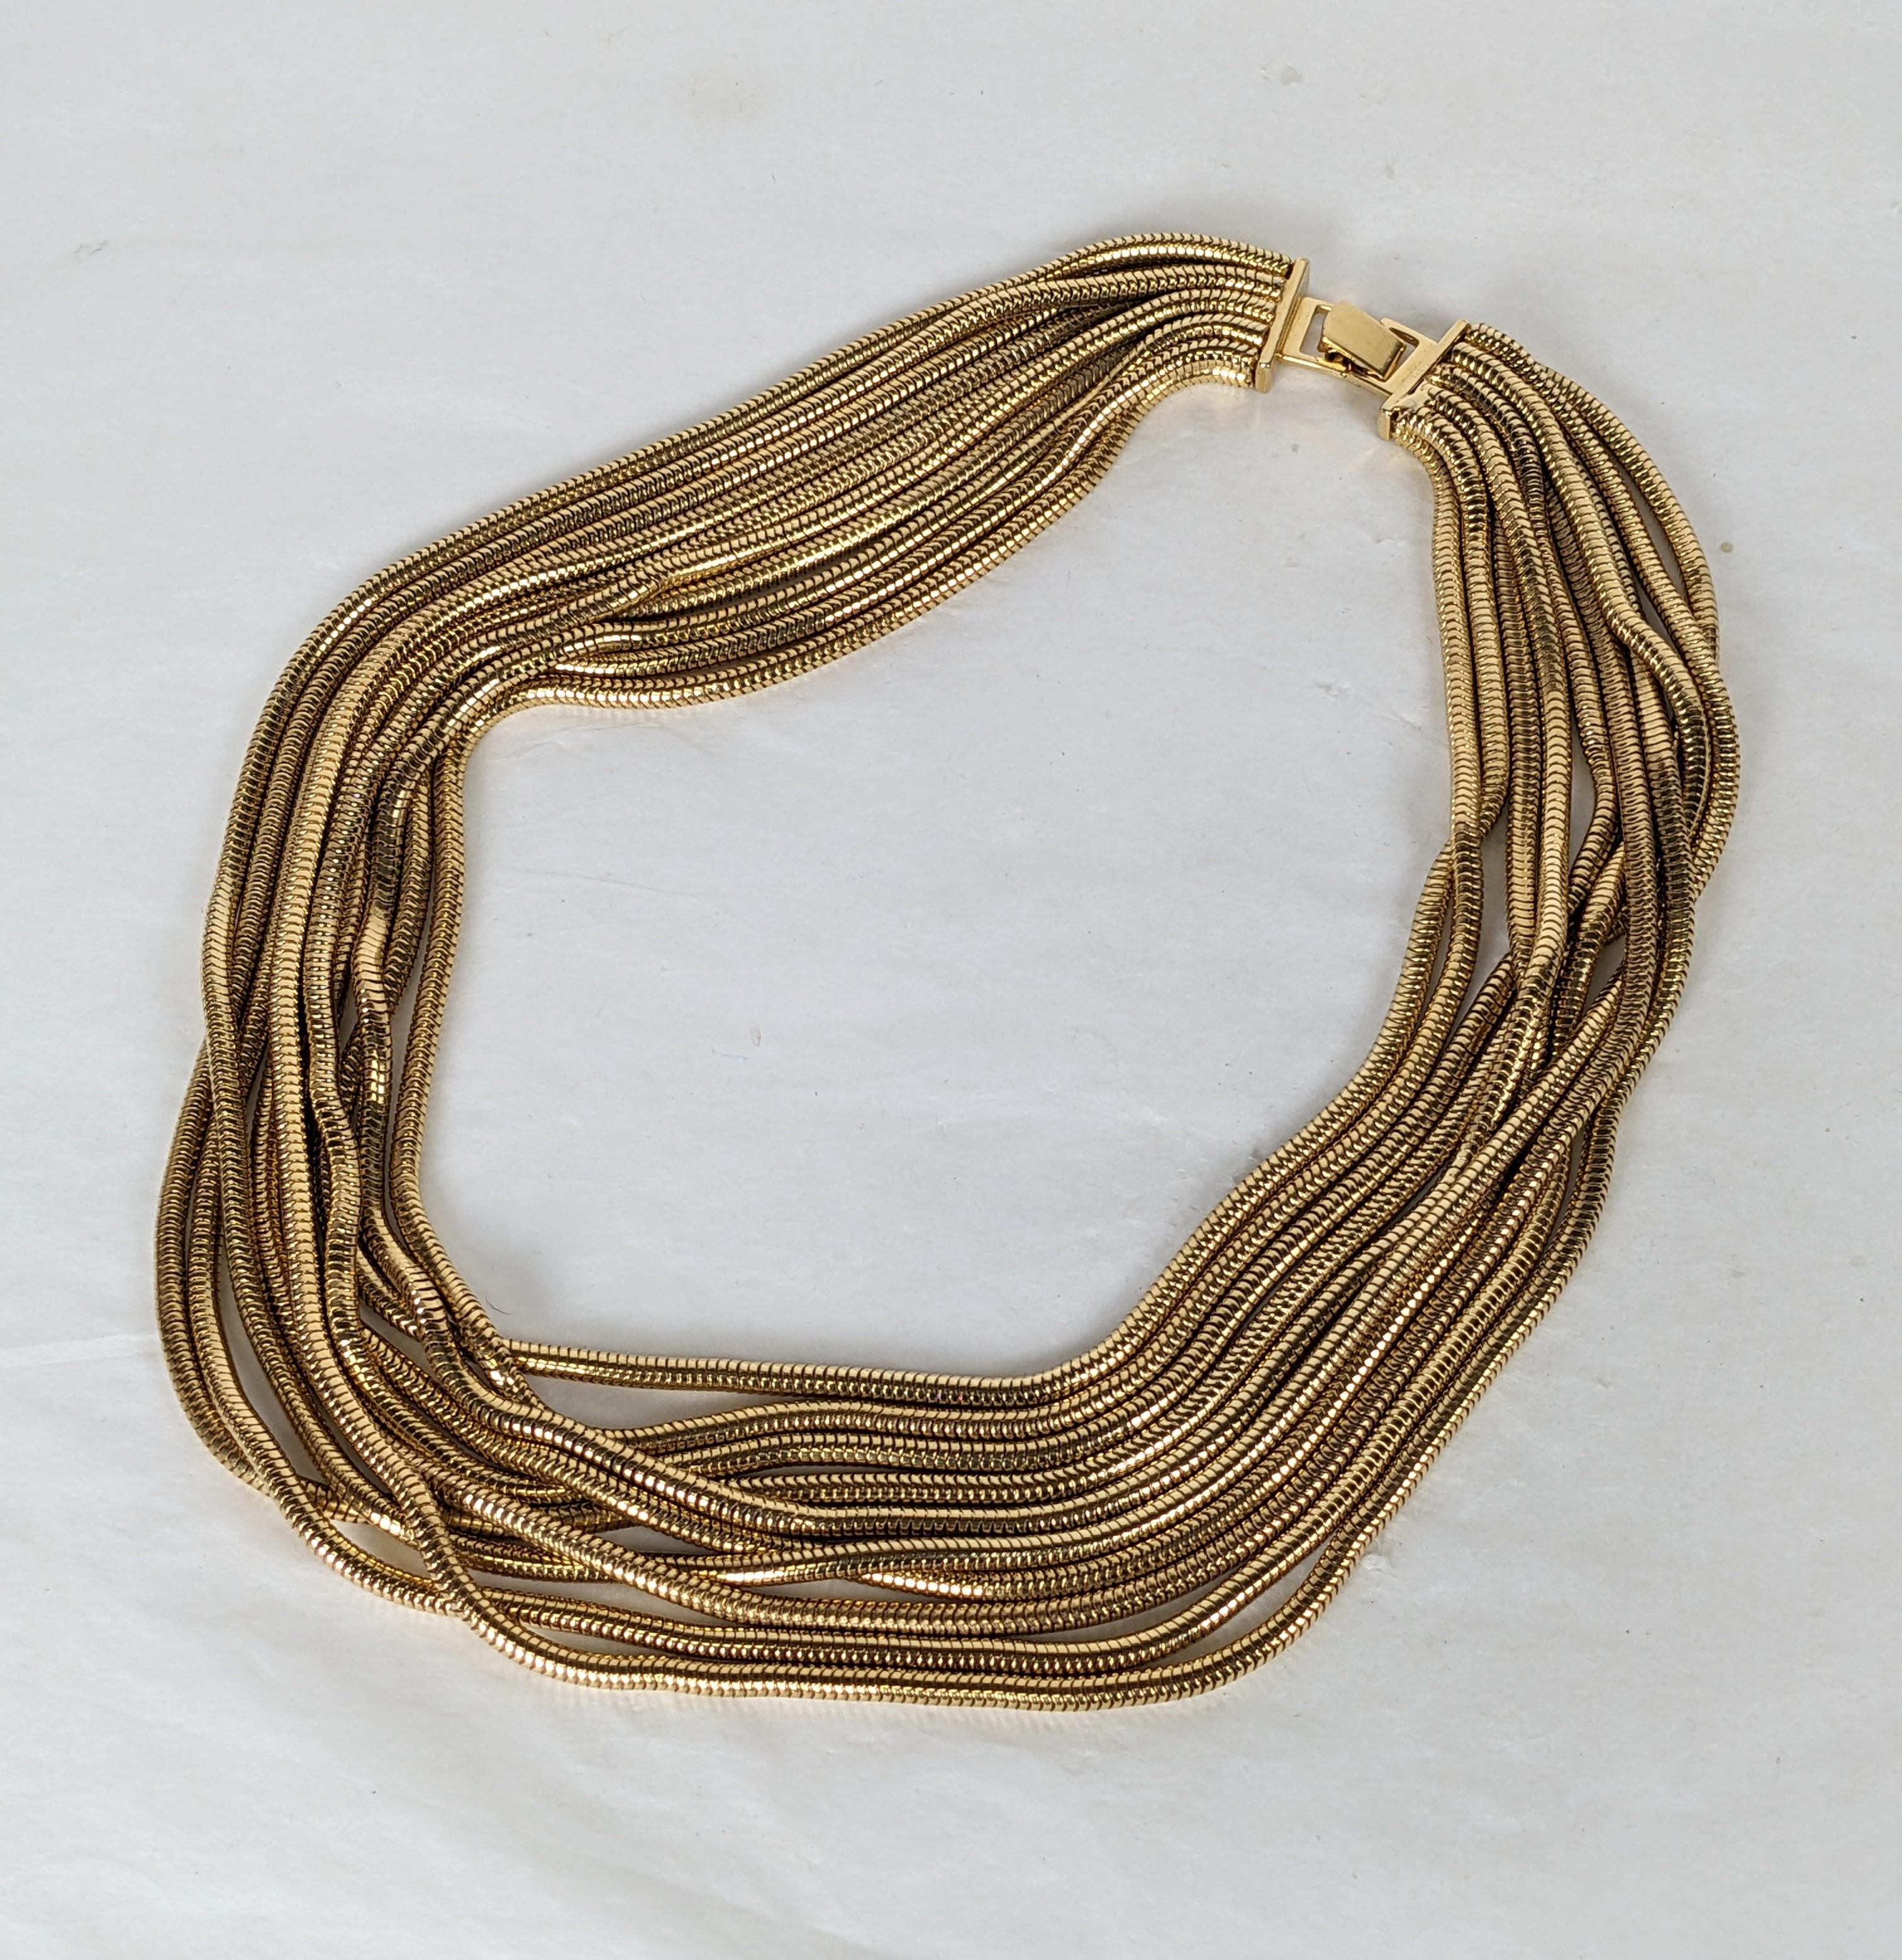 Elegant Gilt Snake Chain Draped Necklace from the 1990's. Unsigned but high quality gold toned snake chains in graduated sizes. 
16